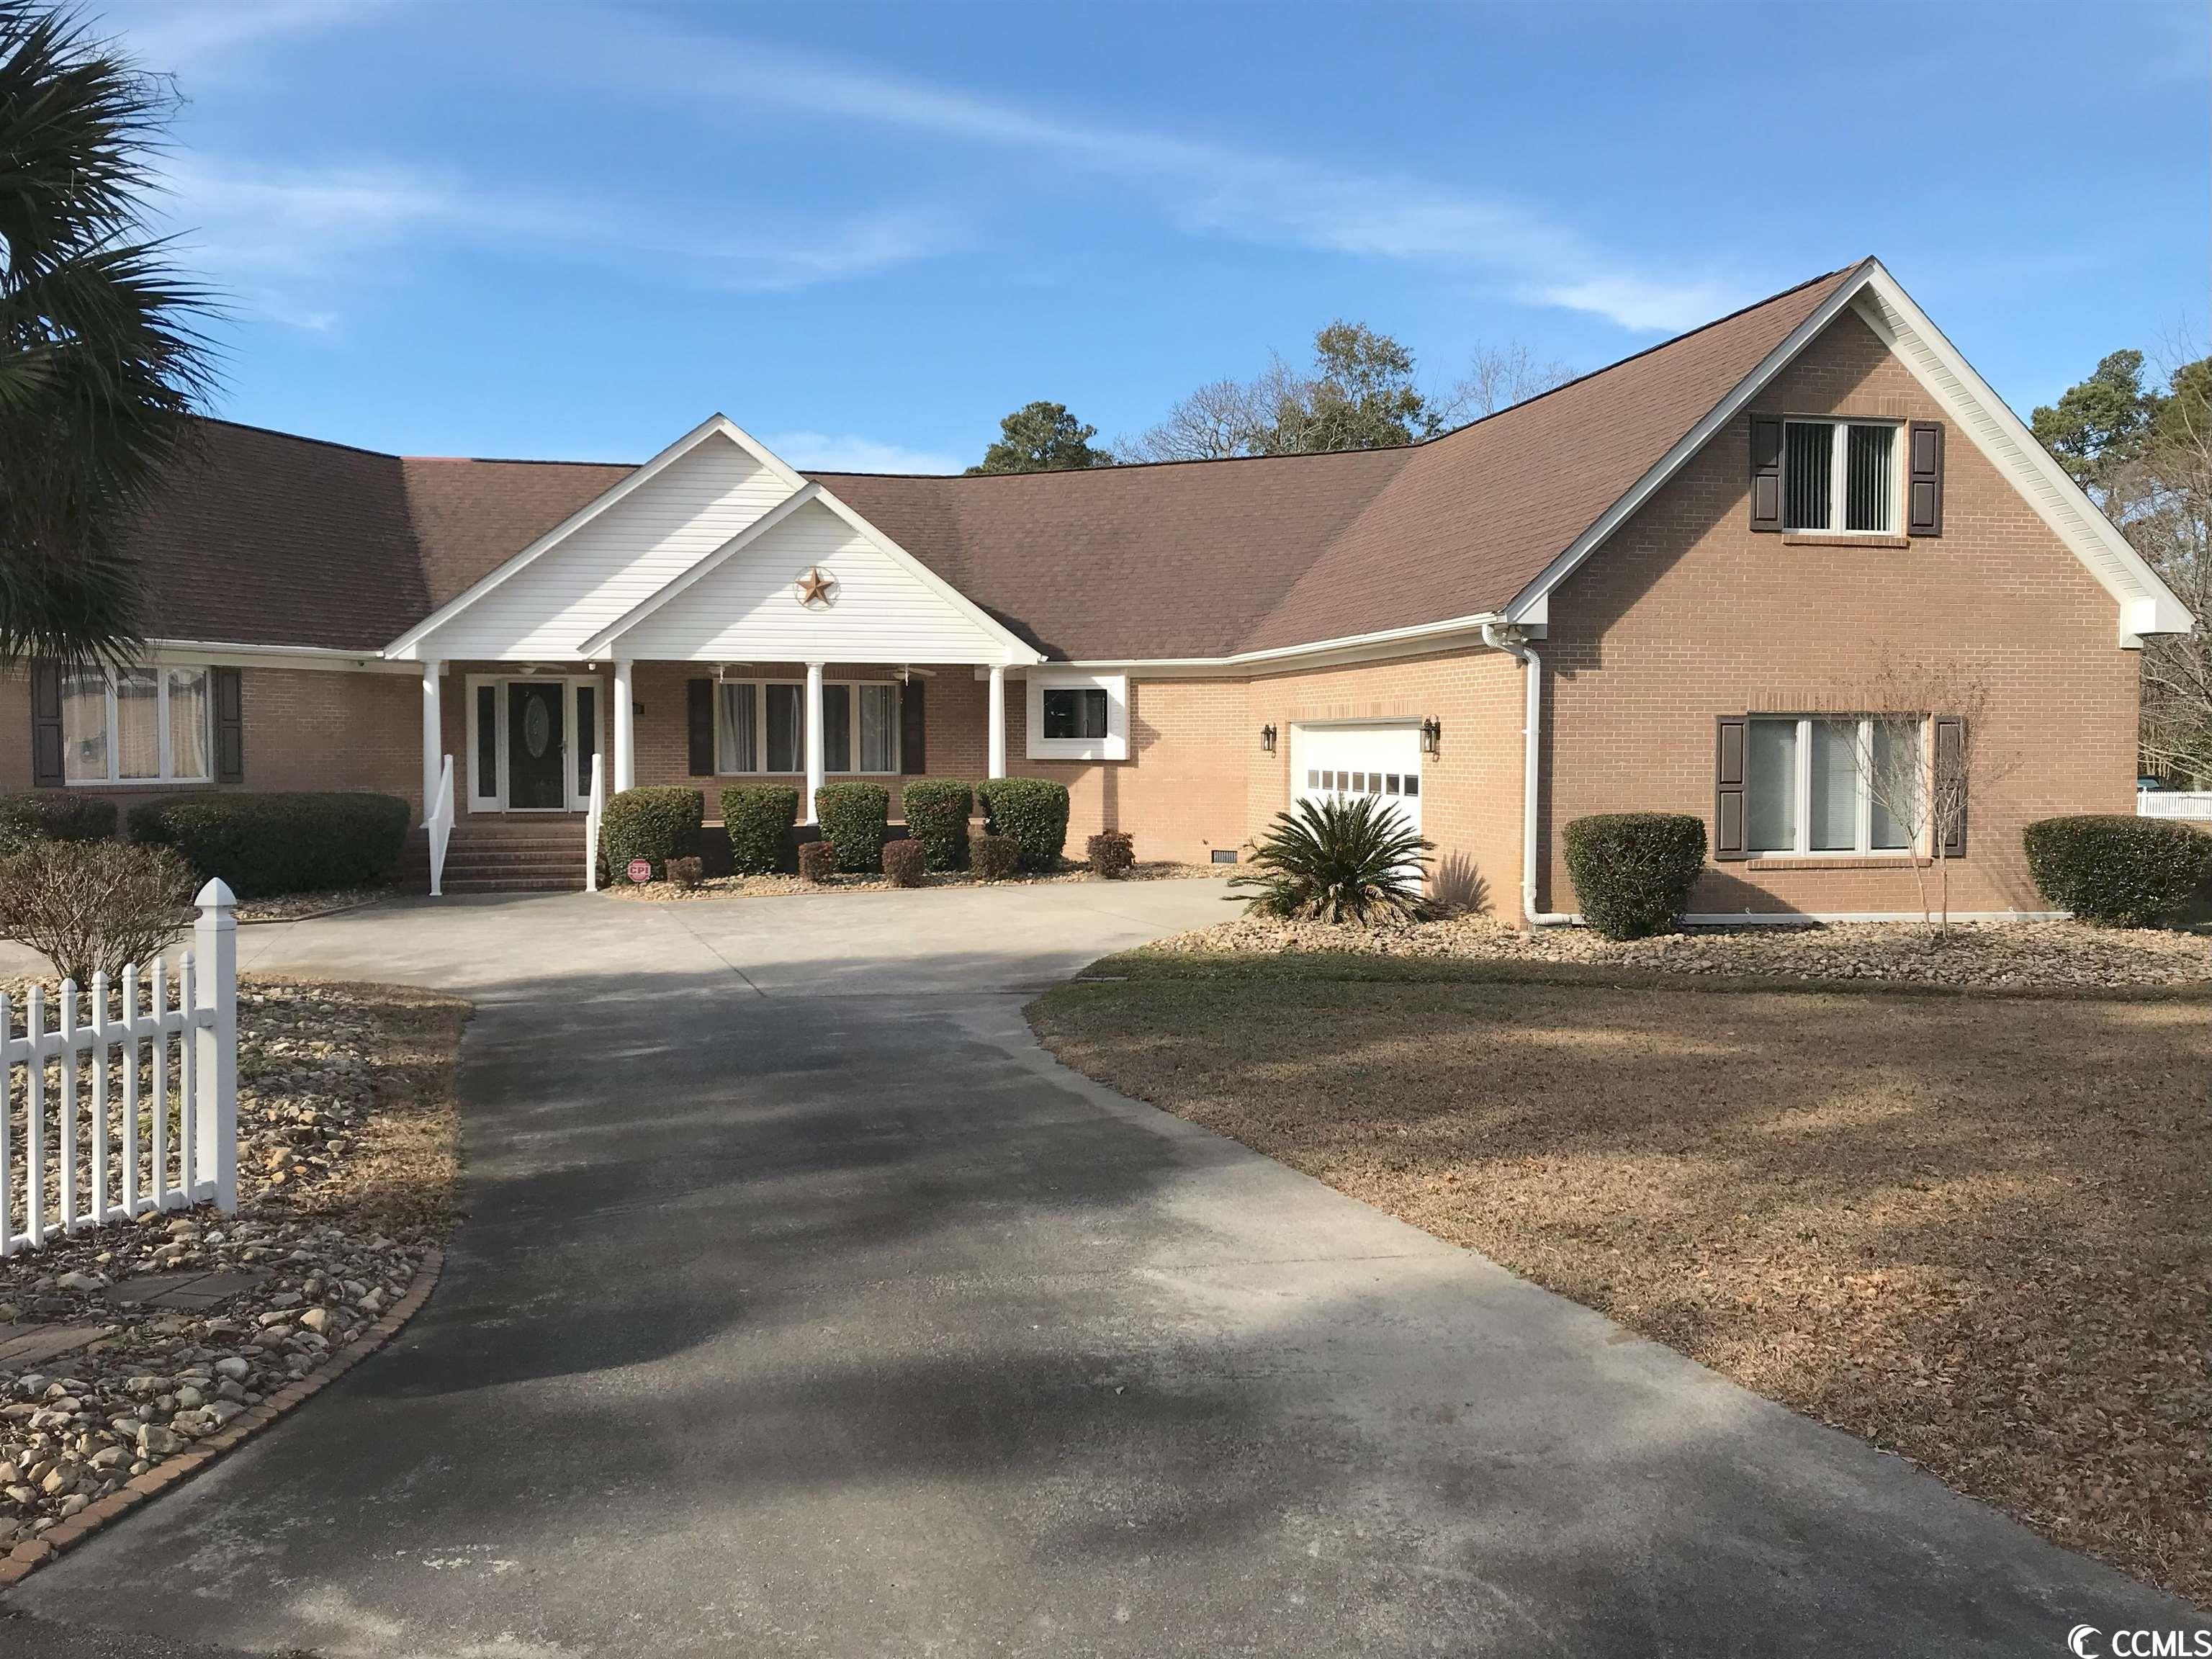 coastal living at its finest! extremely well built all brick home on a large, street to street lot! .79 of an acre!  these homes just do not come available often! the sought after neighborhood of palmetto shores offers close proximity to the beach (golf cart/ walk) while providing a quiet, relaxing atmosphere with the added bonus of no hoa!! pride of ownership stands out in this well kept, stunningly appointed home. the open floorplan provides 2 living spaces, with loads of storage throughout. lvp and tile flooring throughout the main living areas. master suite has double vanity, jetted tub and a large walk-in shower. smooth surface kitchen counter tops and vaulted ceilings in the dining and family room. the home offers a dedicated office and a "hidden" closet within the primary bedrooms walk-in closet!! large, air conditioned bonus room above the garage could be another bedroom/ game room/ art studio. home comes with a gas tankless water heater and gas fireplace! the oversized 30' x 22' garage is perfect for all your beach gear and golf cart, while still providing room for your car. schedule your showing today.